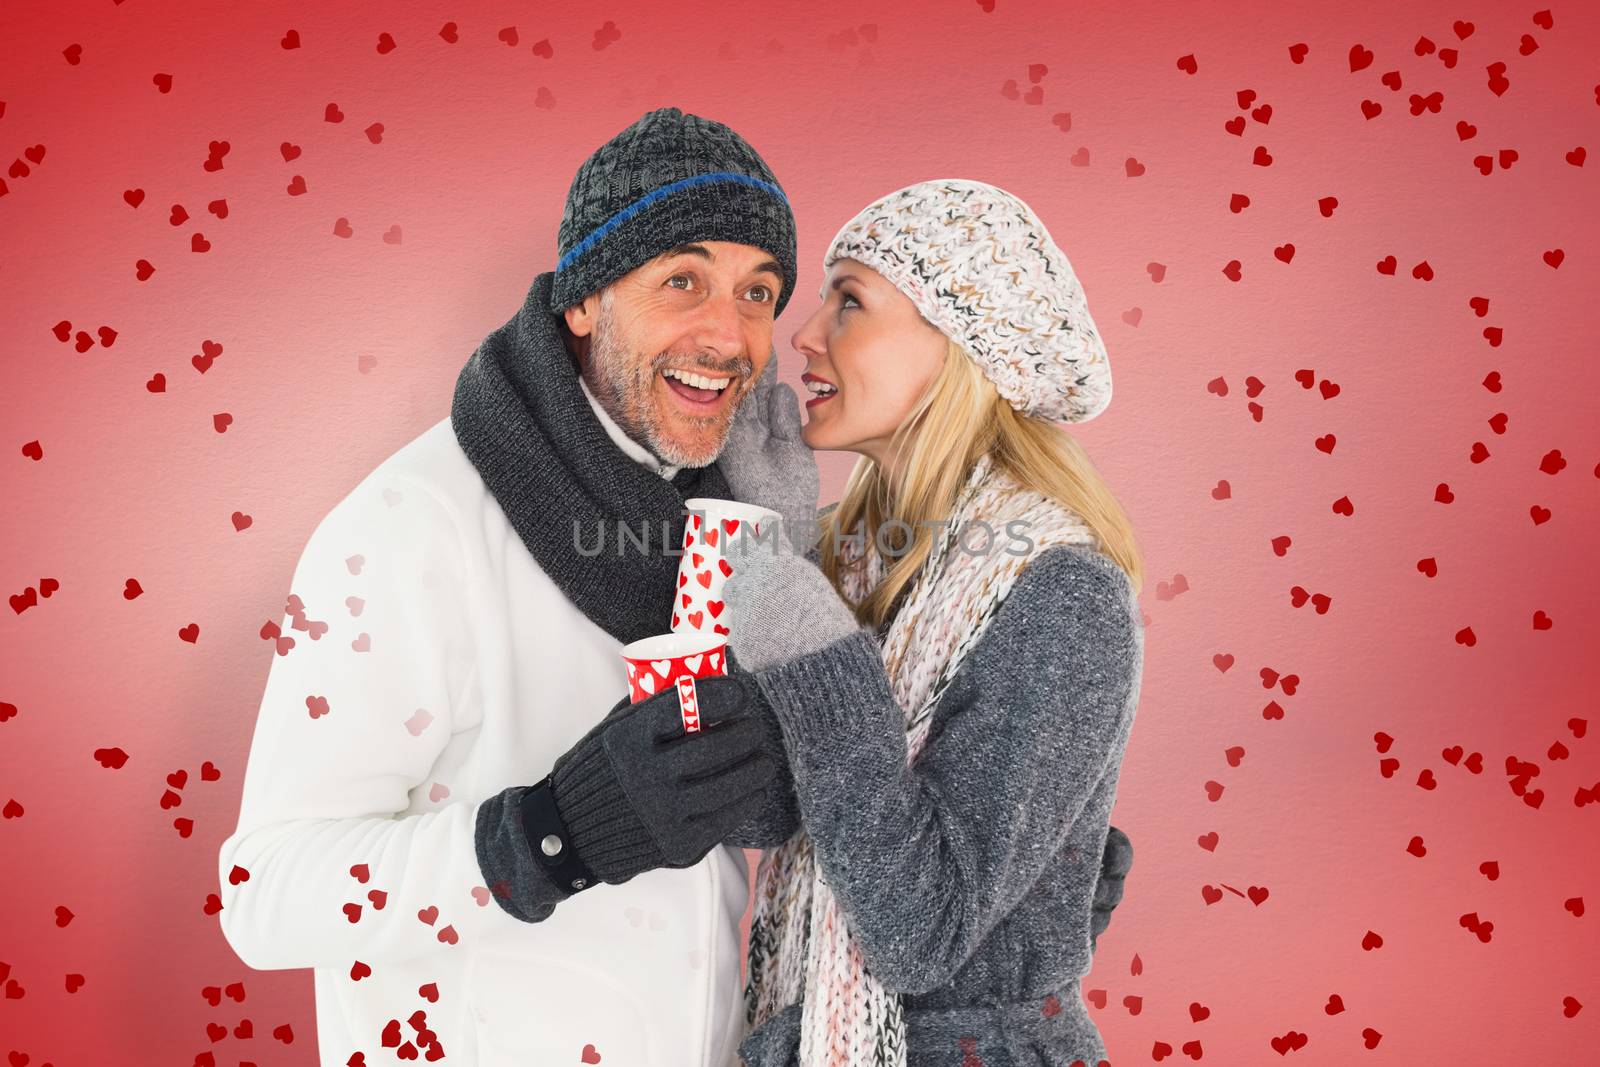 Happy couple in winter fashion holding mugs against red vignette